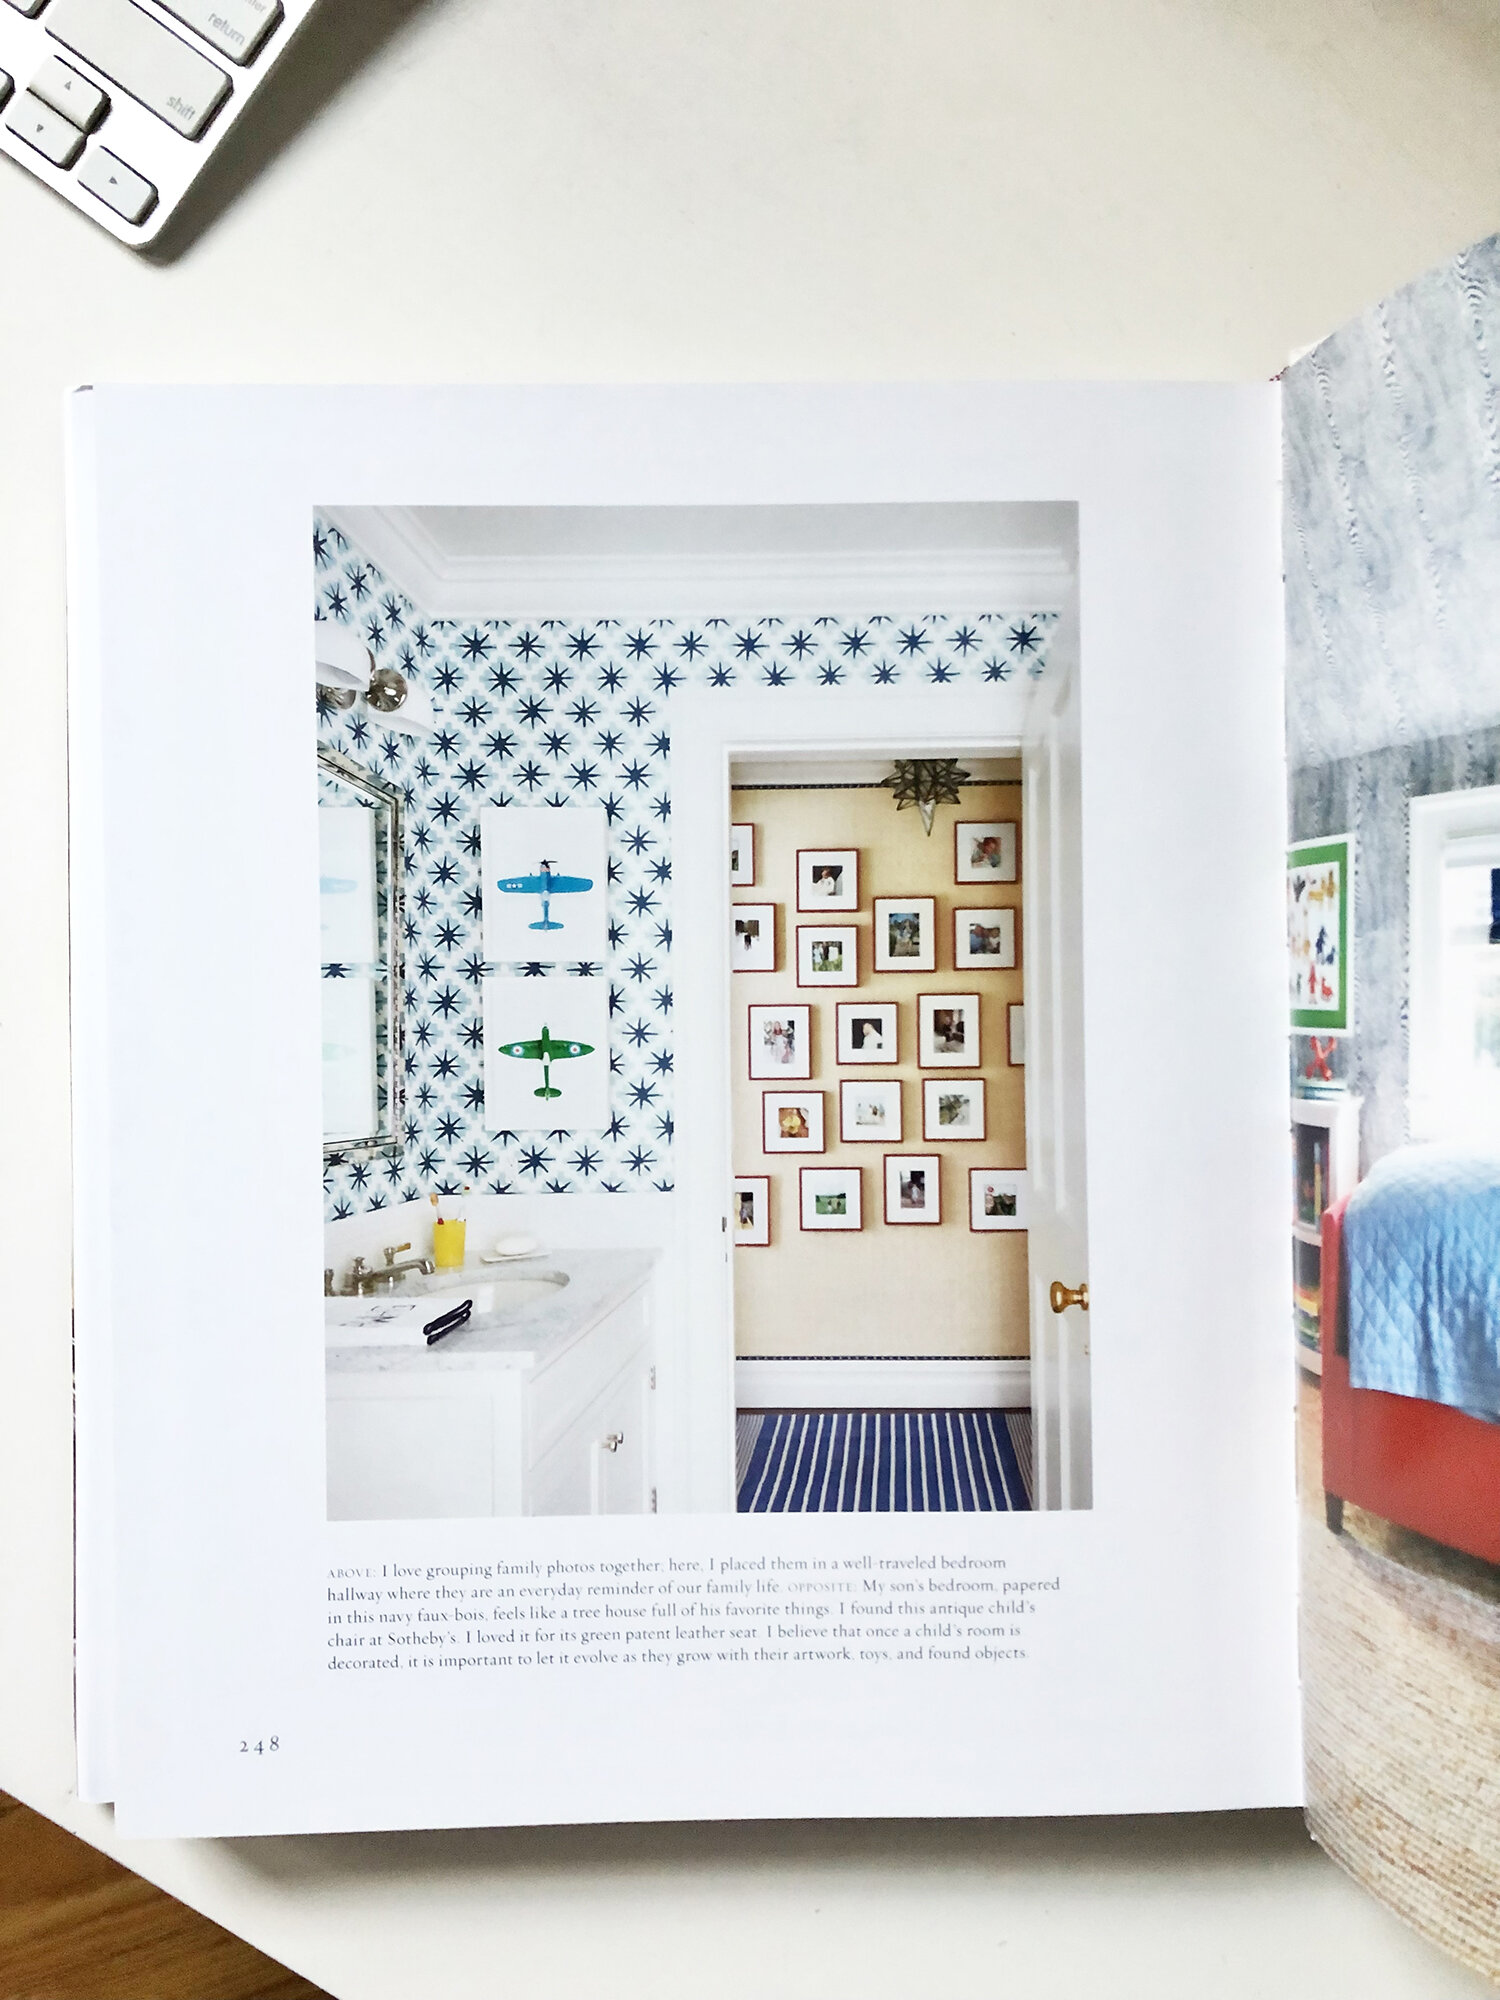 We consider it high praise for an industry leading designer like Ashley Whittaker to choose our artwork to have in her personal home. Our airplanes are in her son’s bathroom! We love how they look!